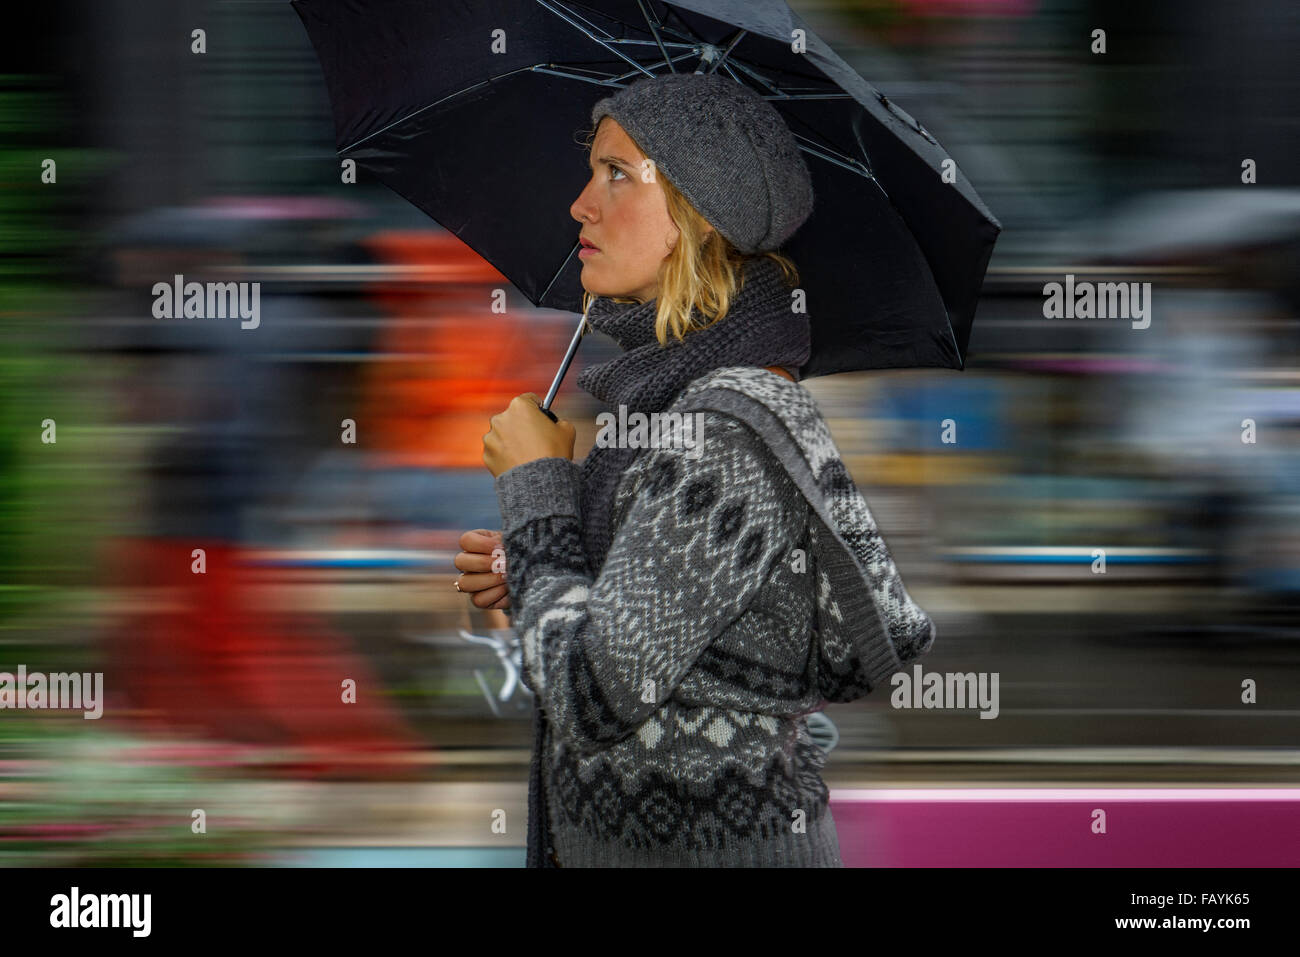 Woman with an umbrella. Rainy day during the Summer Cultural Festival, Reykjavik, Iceland Stock Photo